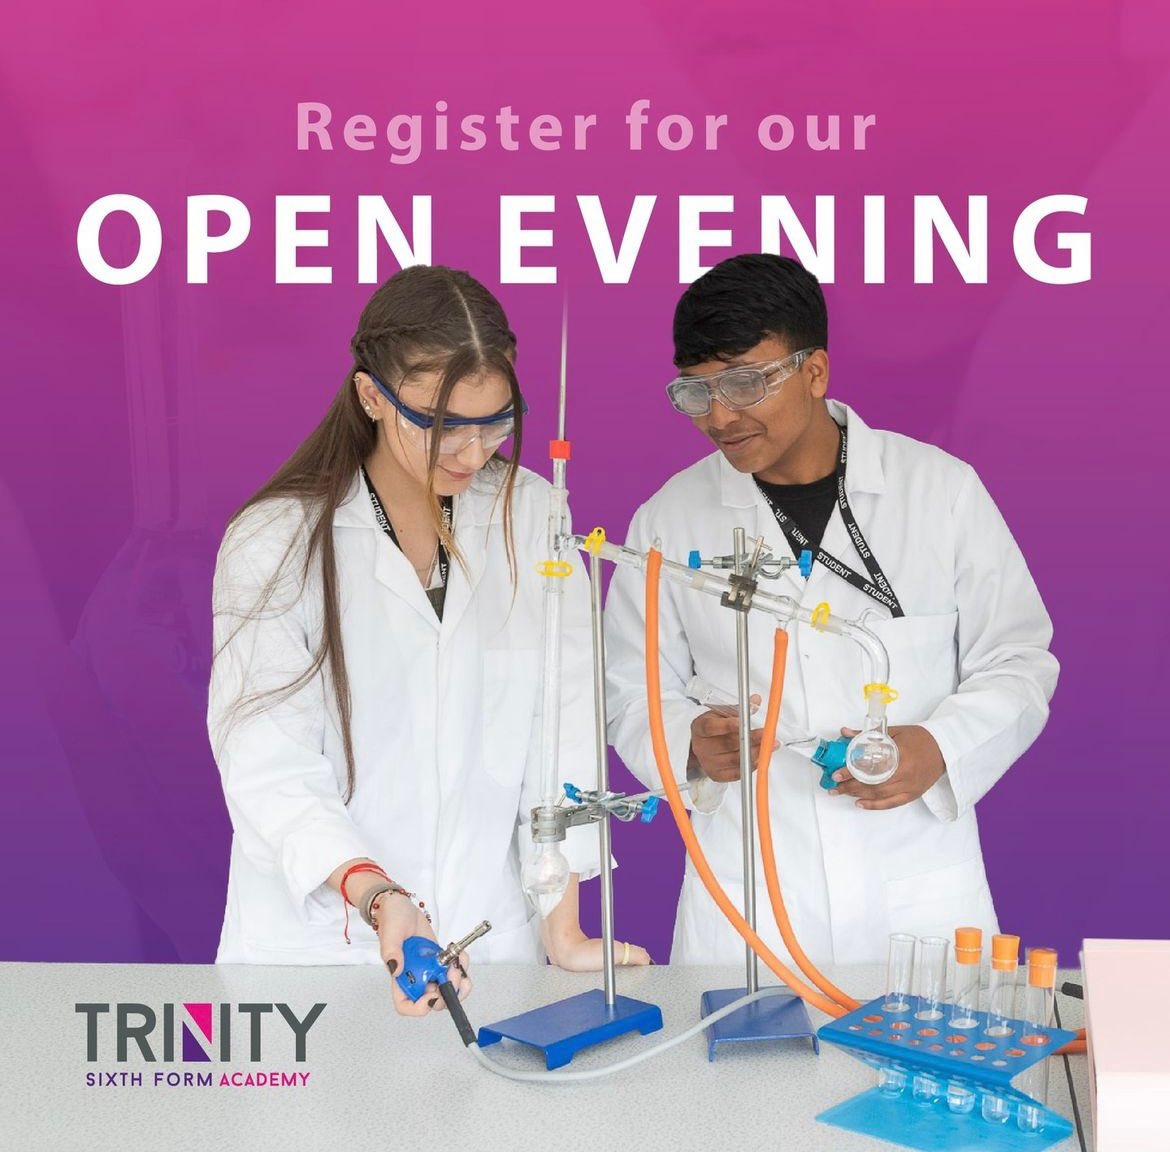 THURSDAY 26th JANUARY!
Trinity Sixth Form Academy invites you to our second Open Evening due to high demand! Our doors will be open 4:45pm-7:45pm